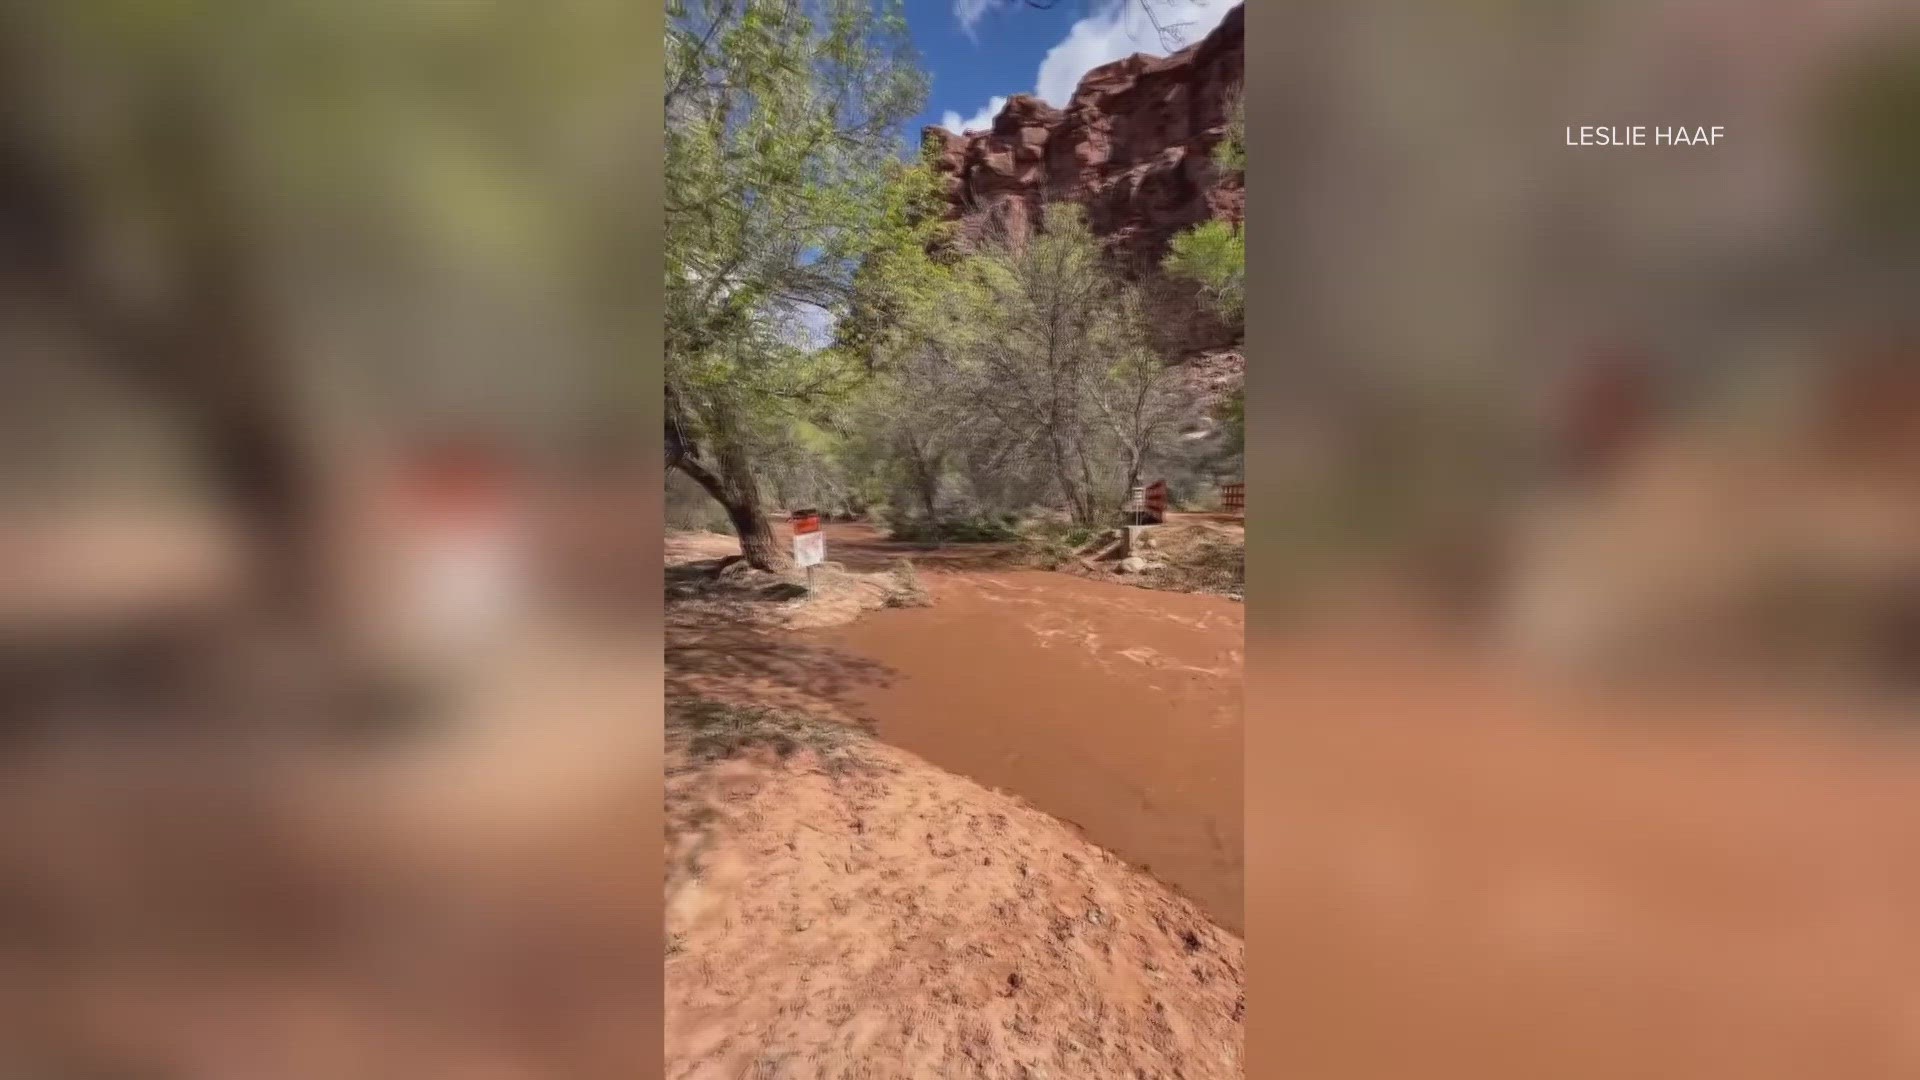 According to early reports, a large group of hikers was stranded near Supai Village because of floods in the area.